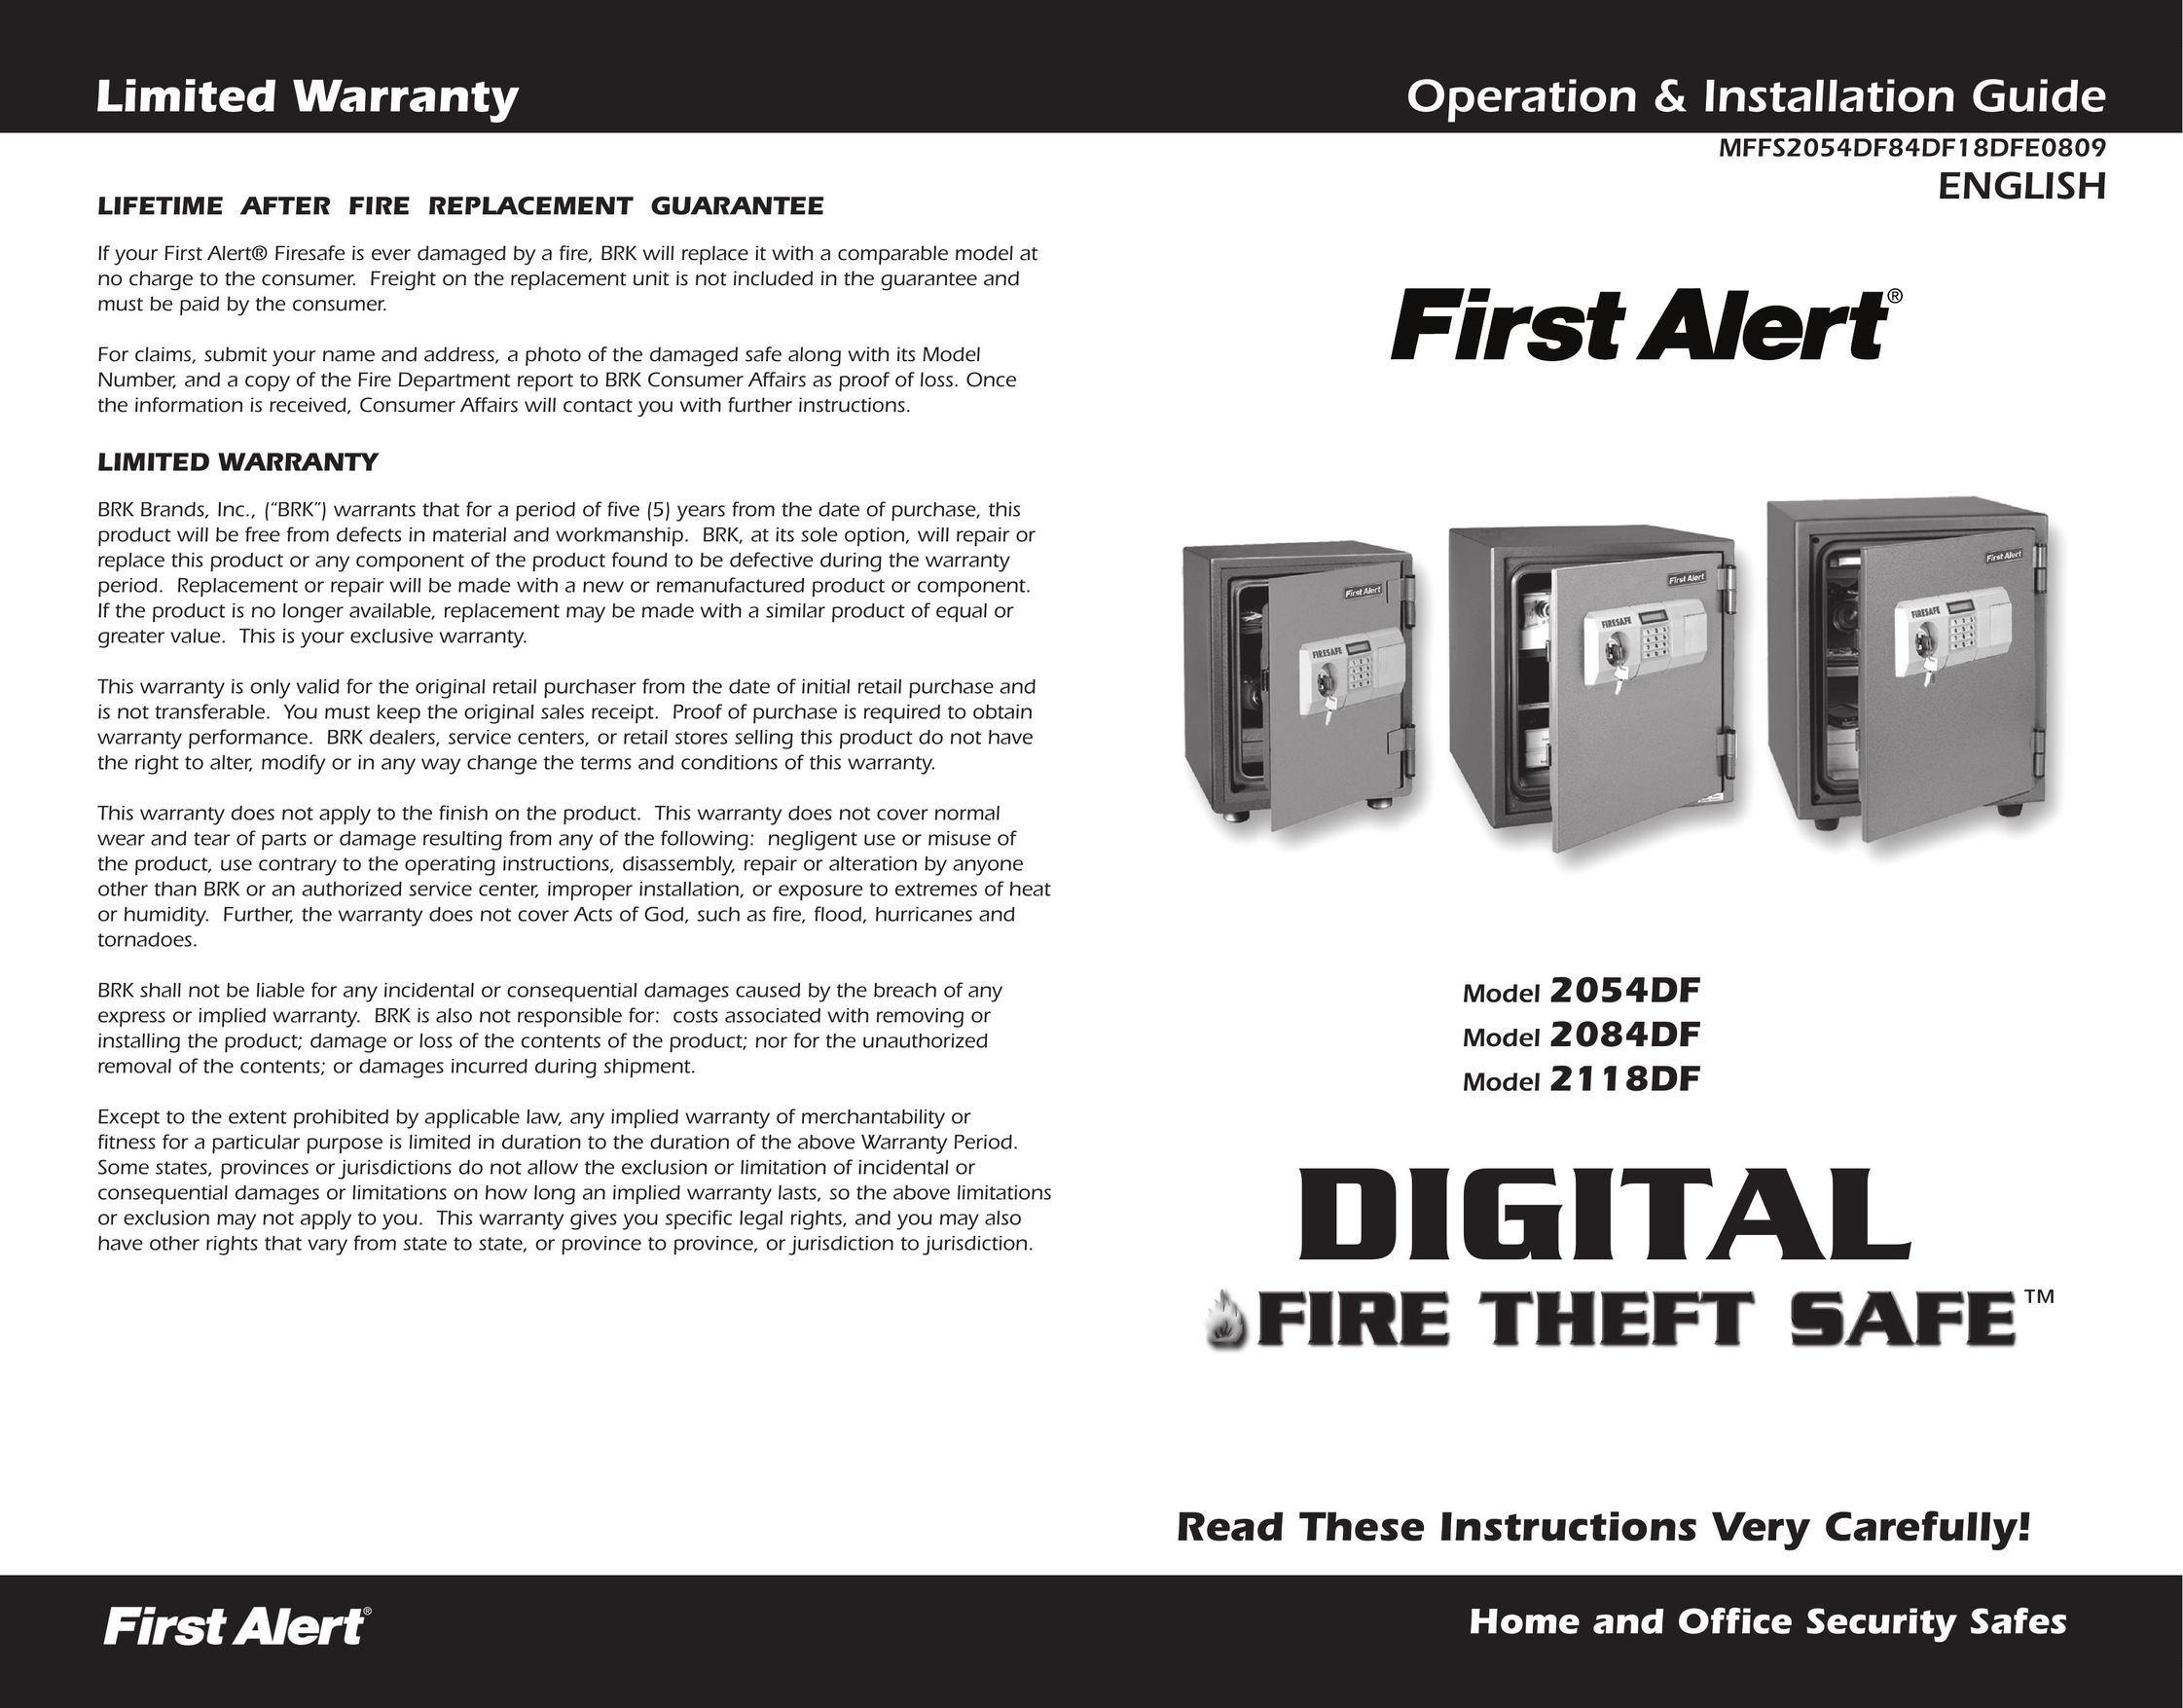 First Alert 2118DF Home Security System User Manual